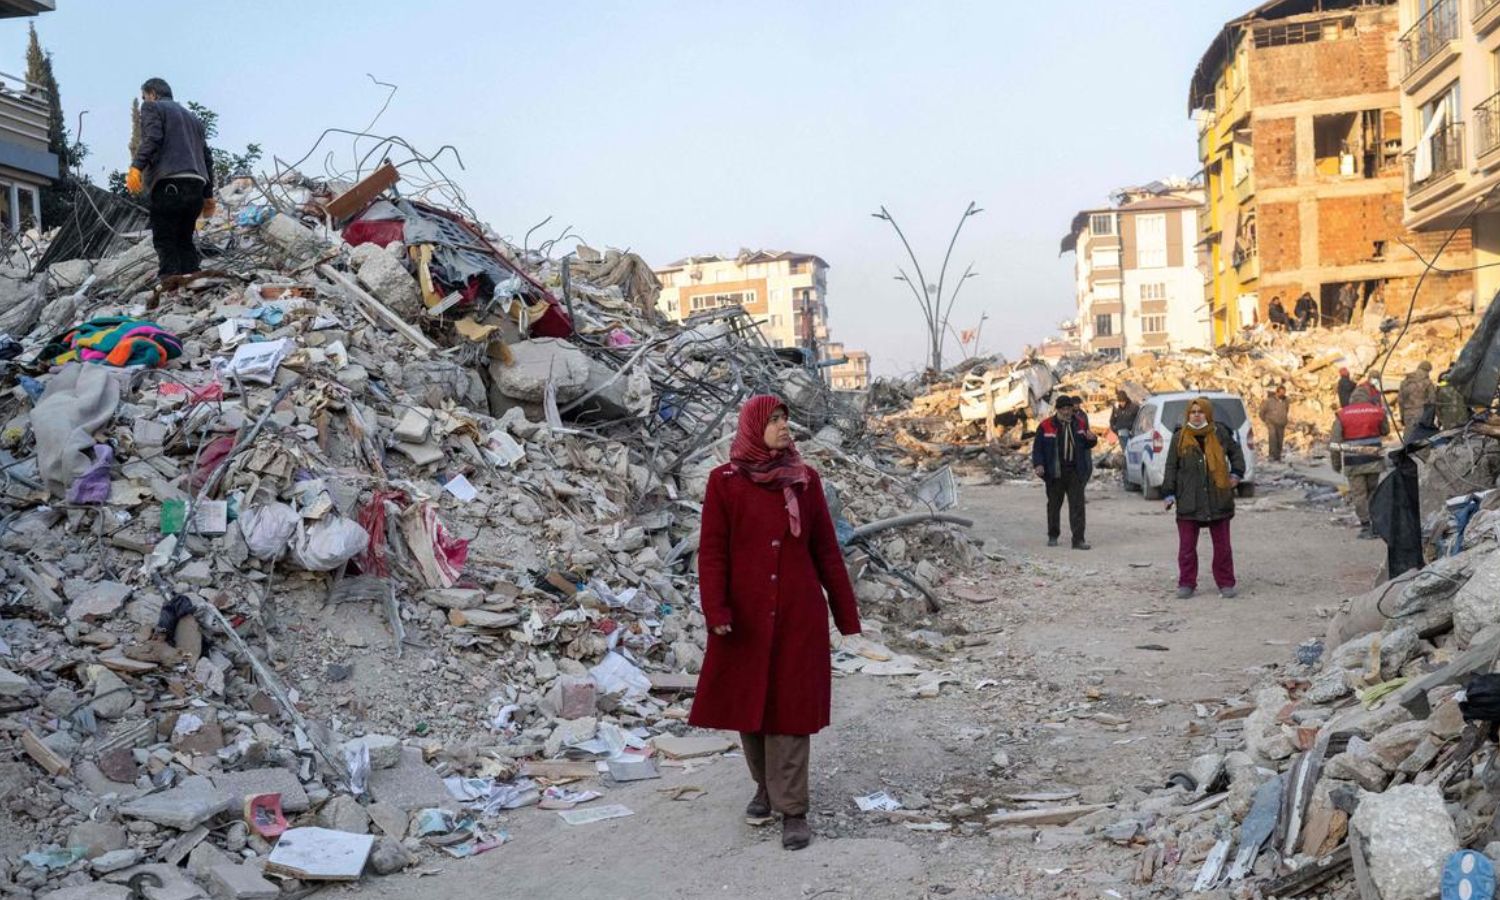 Women’s projects in southern Turkey were heavily affected by the devastating Feb.6 earthquake - February 2023 (AFP)